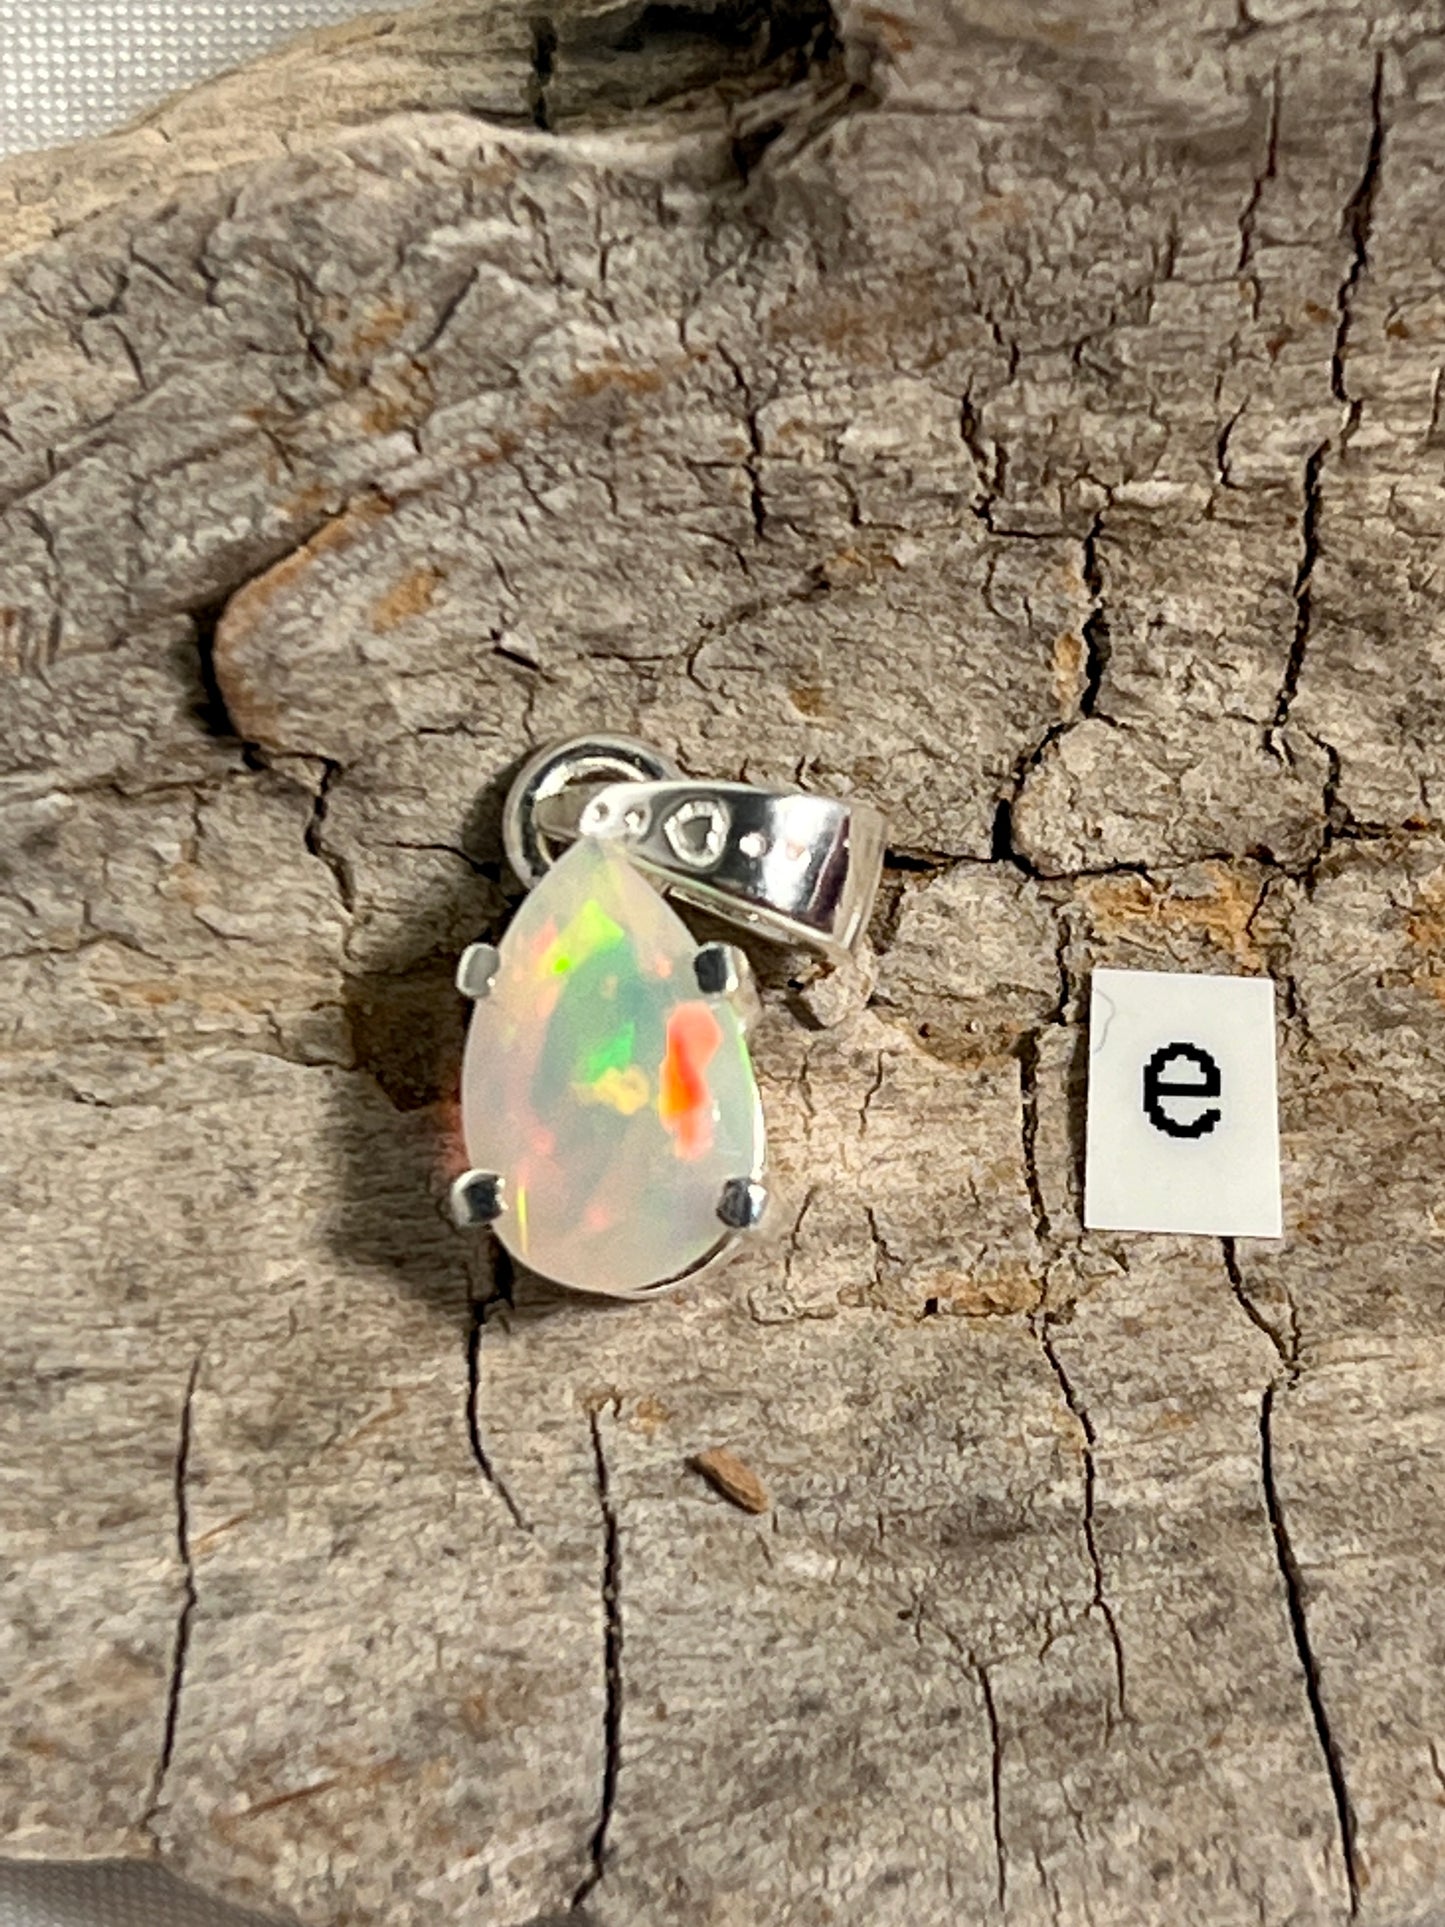 
                  
                    A stunning Dainty Prong Set Facet Cut Teardrop Shaped Ethiopian Opal Pendant with the letter "e" delicately engraved on it, crafted in elegant sterling silver by Super Silver.
                  
                